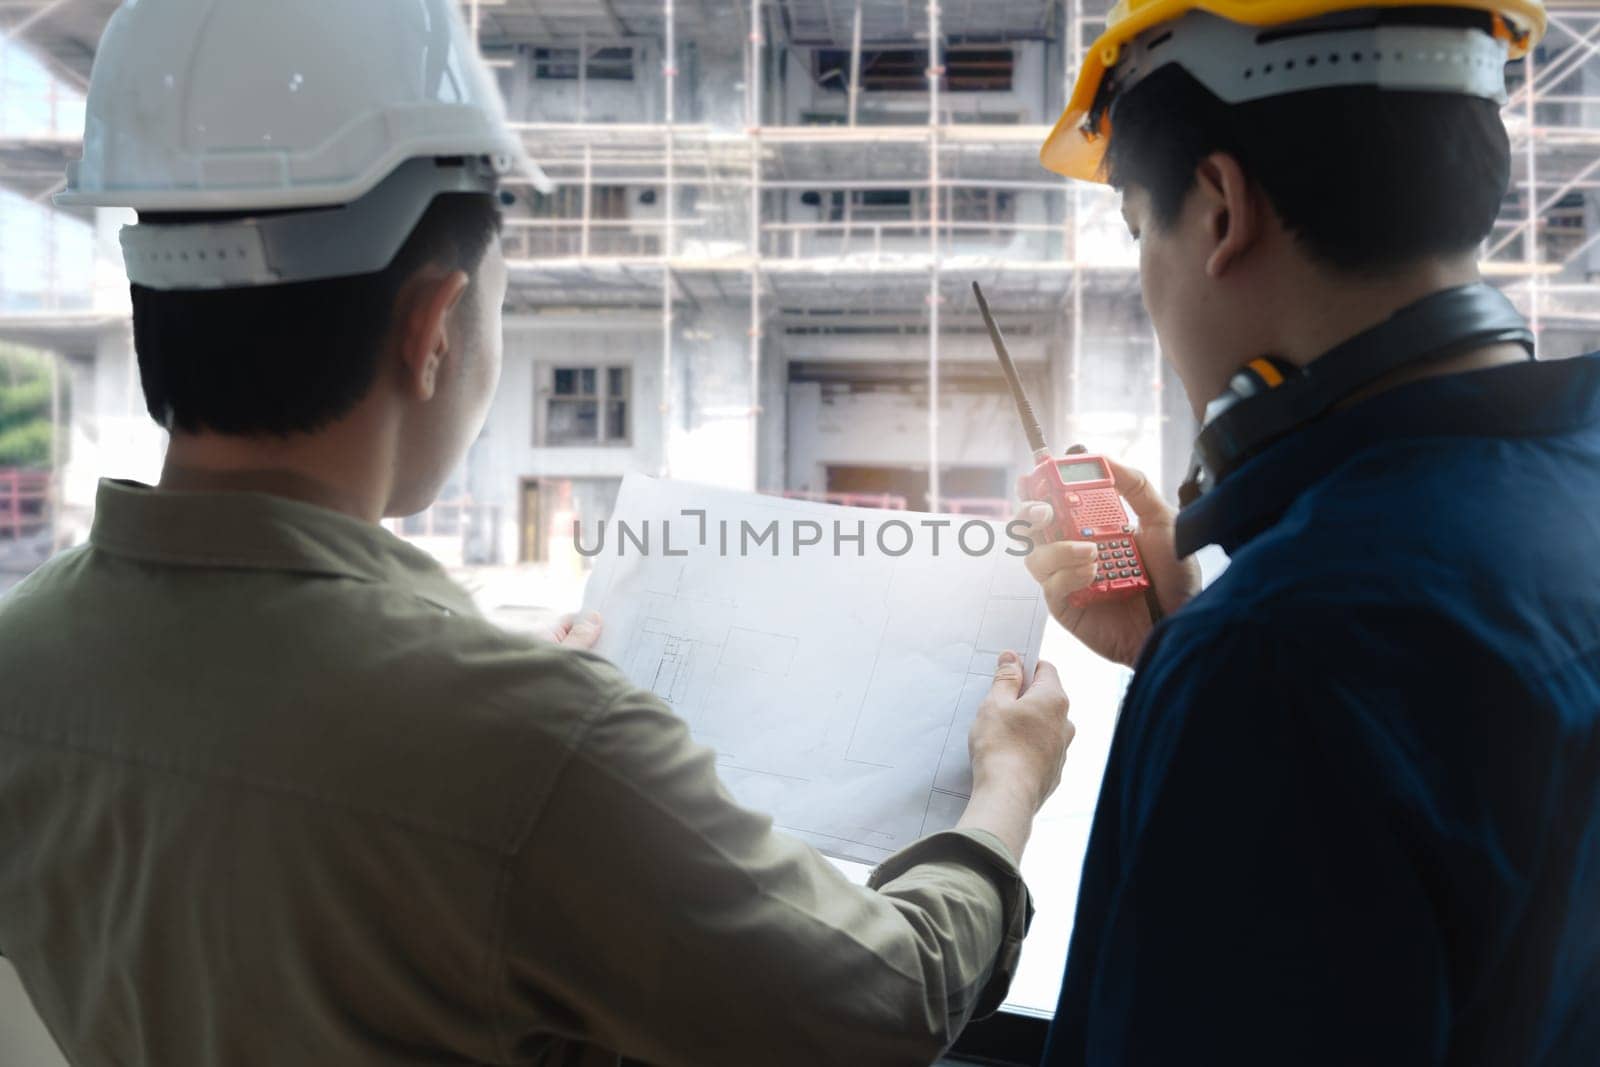 Civil engineers and architects inspecting and working building site with blueprints and holding walkie talkie by itchaznong